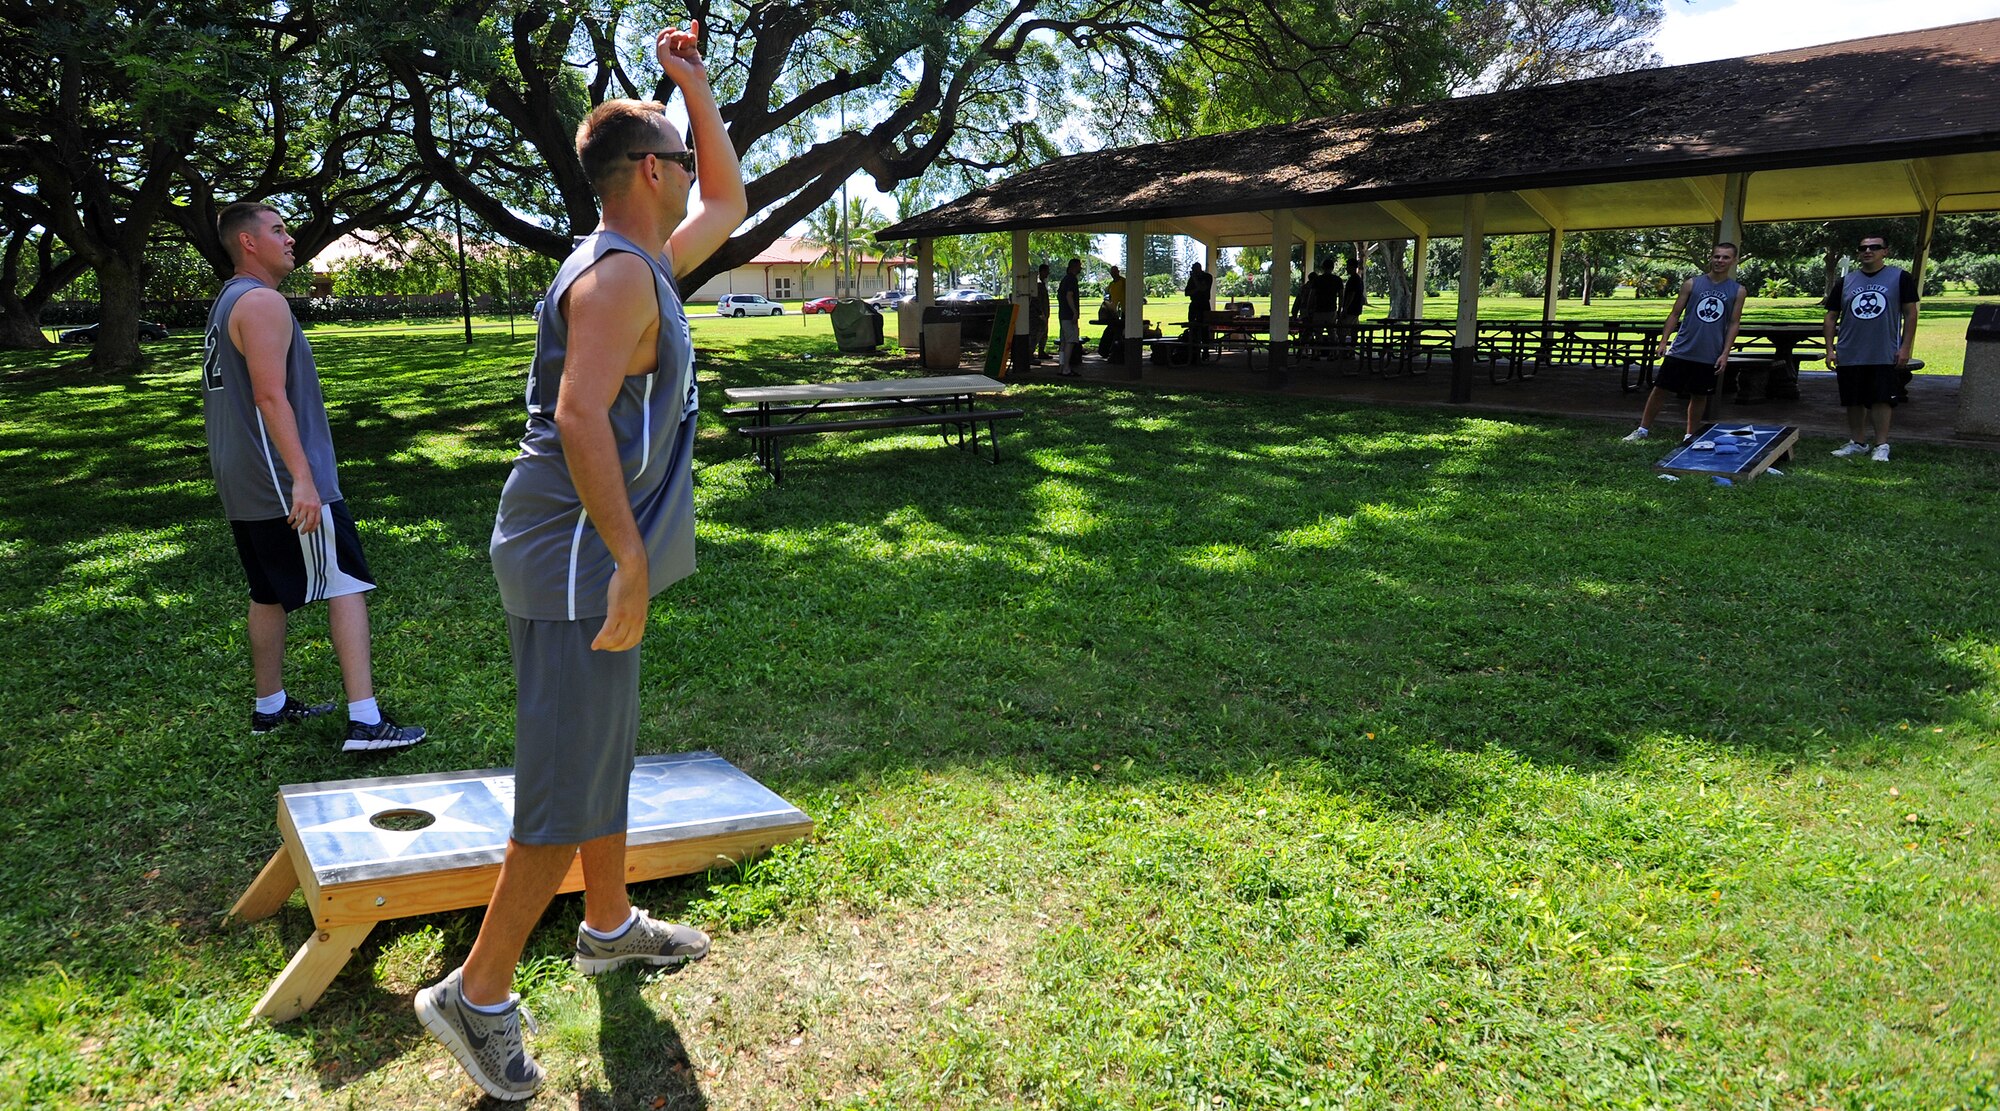 Airmen from the 15th Maintenance Group compete in a corn-hole competition during the group’s Wingman Day at Joint Base Pearl Harbor-Hickam, Hawaii, Feb. 20, 2014. Wingman Day reminds Airmen the importance of communication and integrity. (U.S. Air Force photo/Master Sgt. Jerome S. Tayborn)